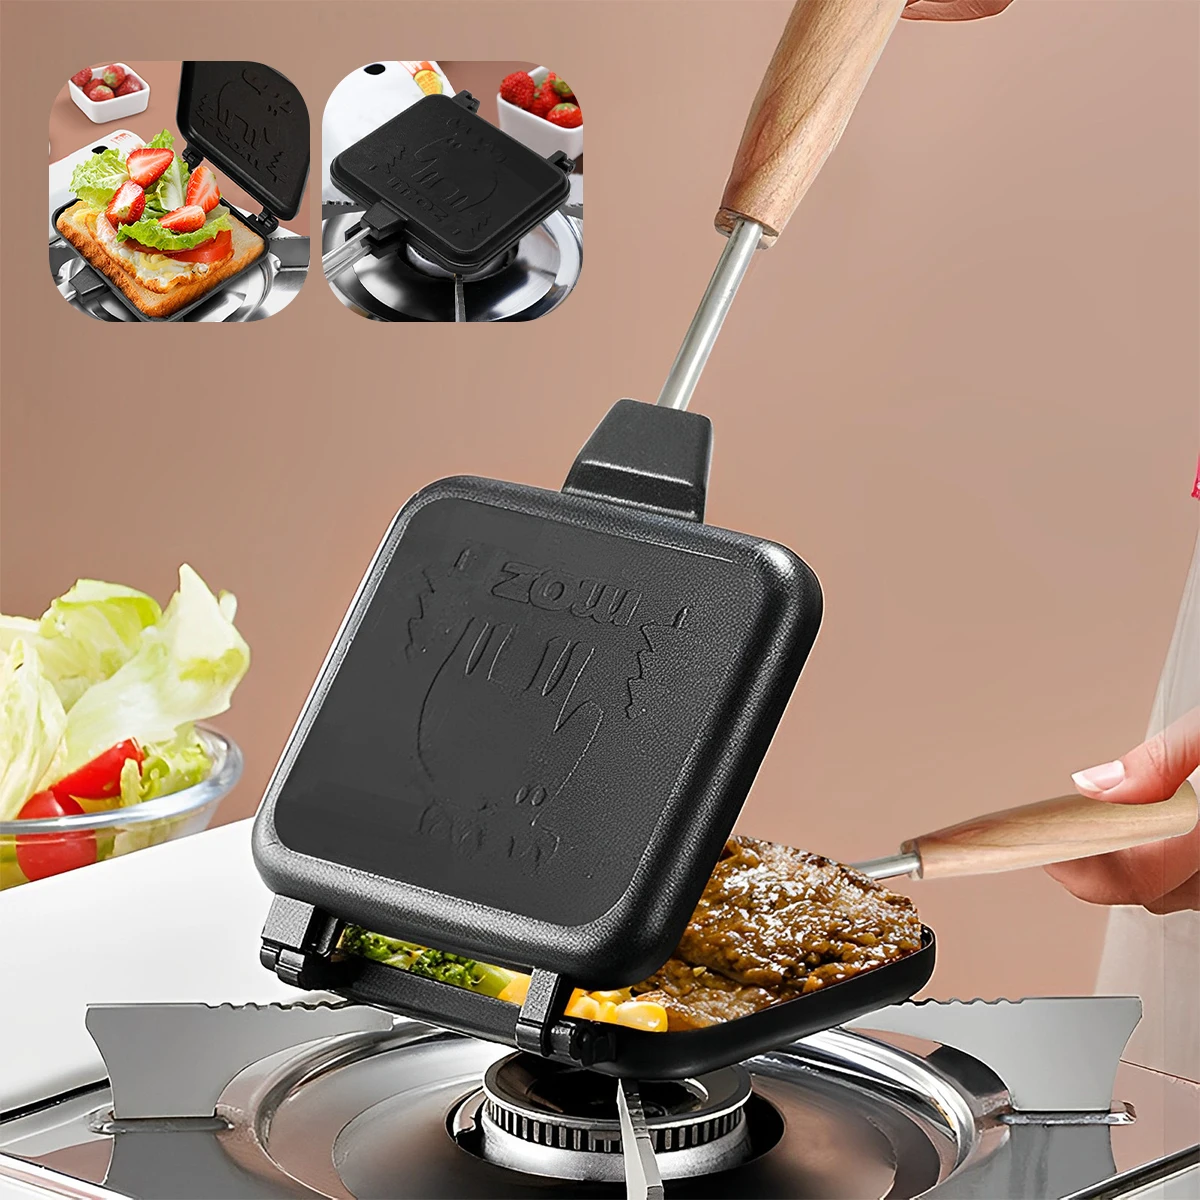 

Toasted Sandwich Maker with Wooden Handle Double Sided Sandwich Grill Pan Non-Stick Stovetop Toaster Portable Sandwich Maker